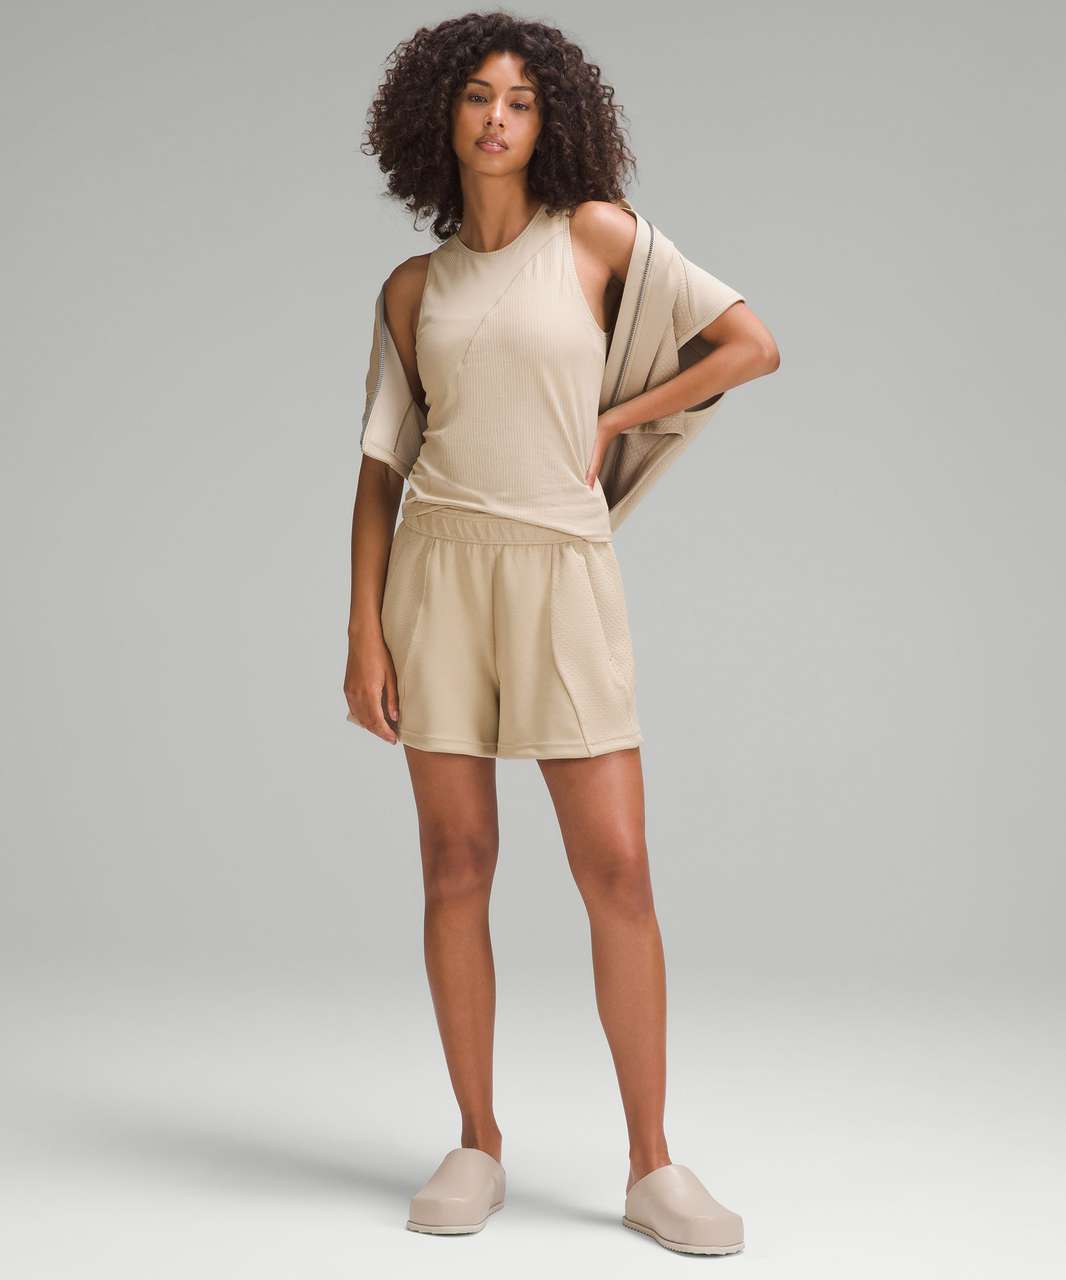 Lululemon Asymmetrical Ribbed Cotton Tank Top - Trench